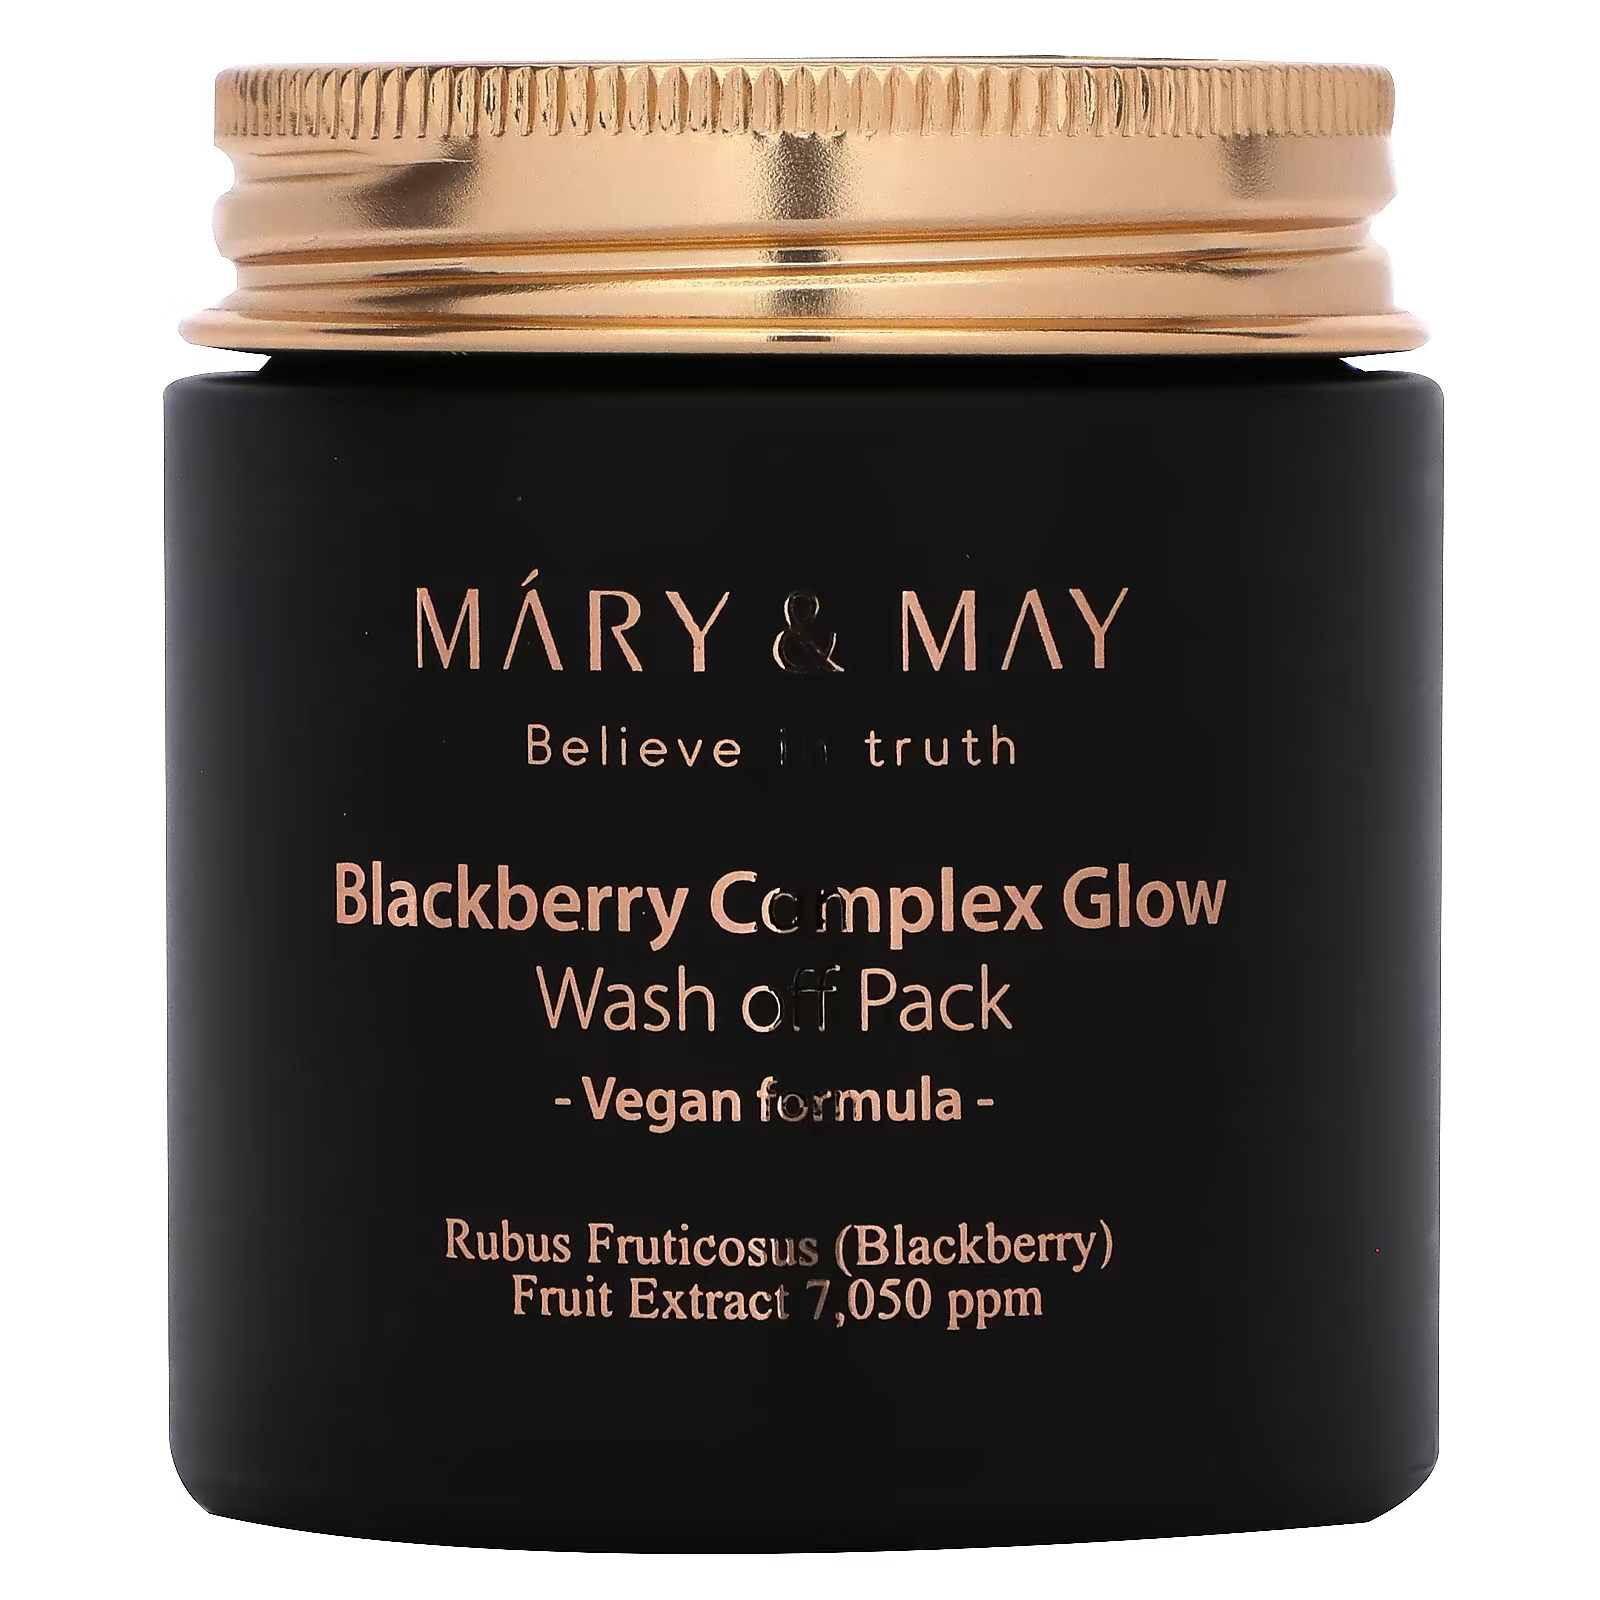 Набор масок Mary & May Blackberry Complex Glow innisfree capsule recipe pack with volcanic cluster wash off mask